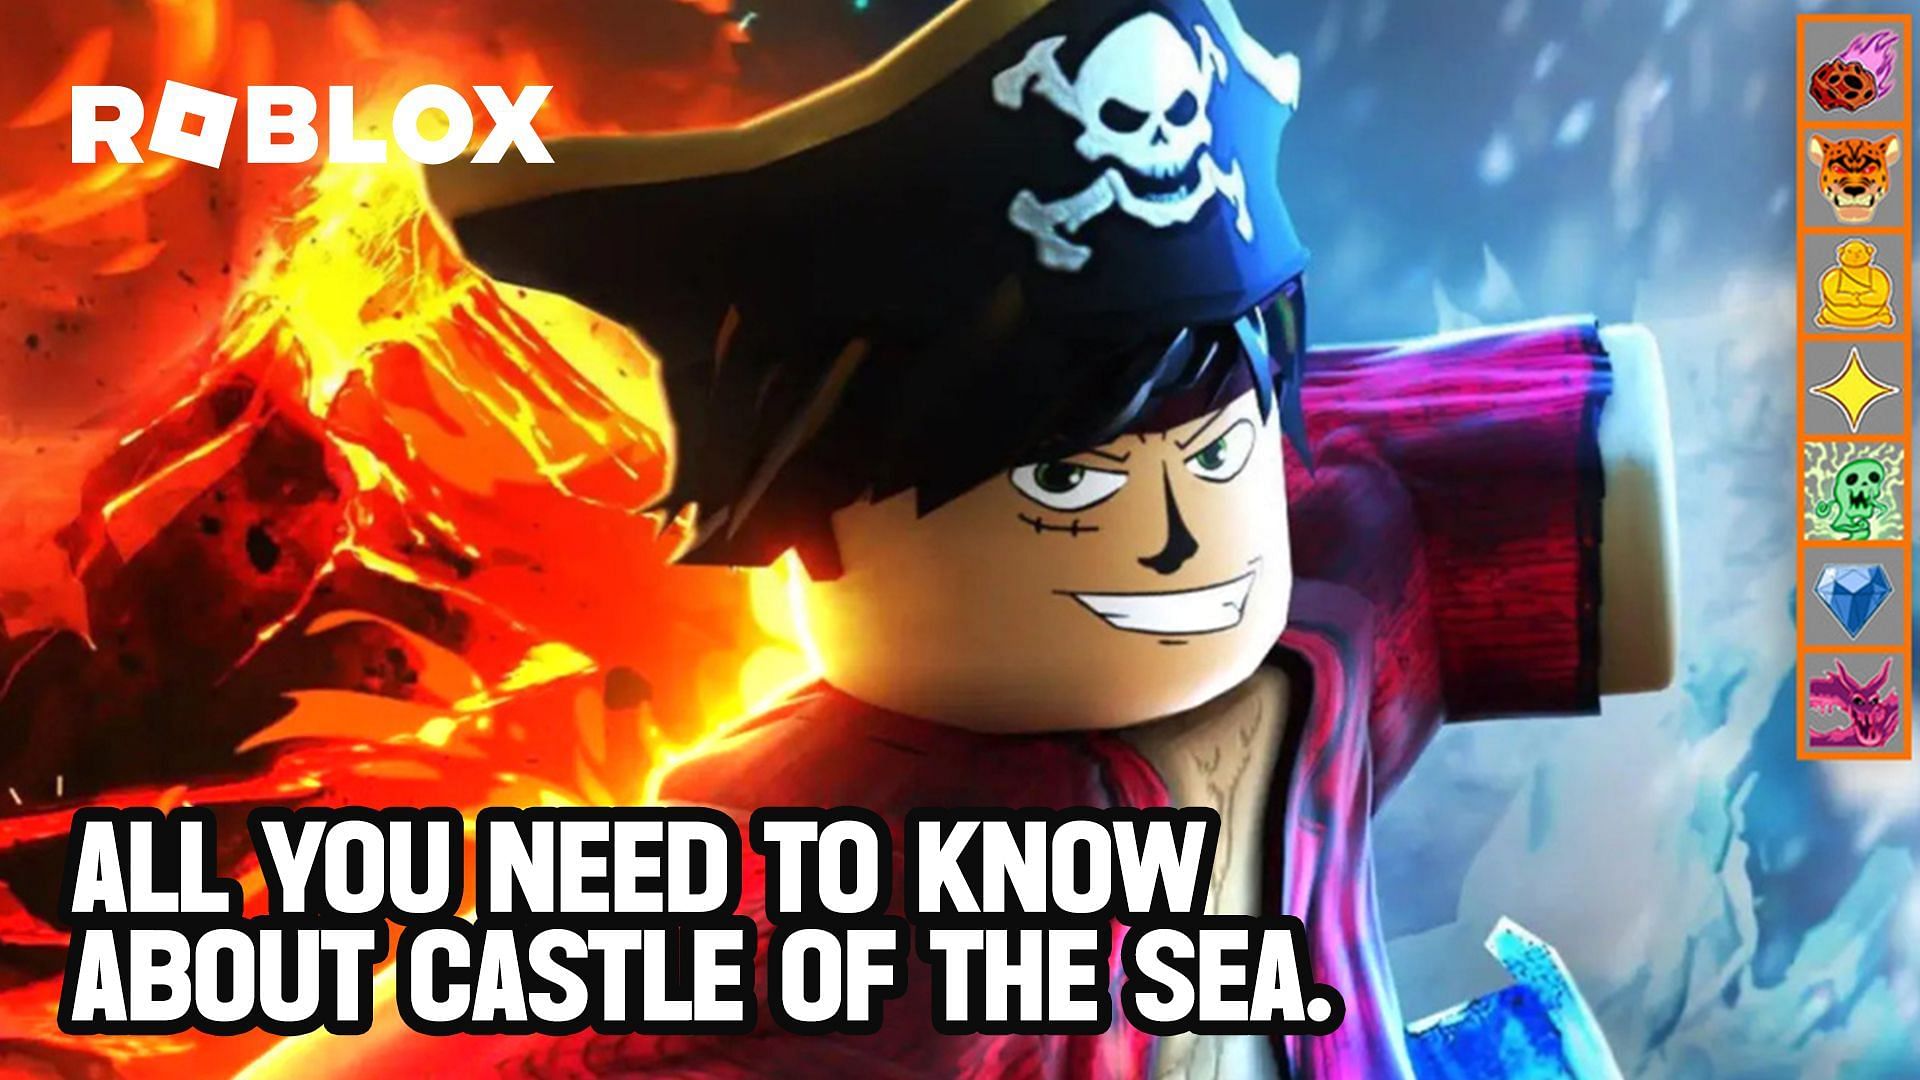 How to go to Third Sea in Blox Fruits - Gamer Journalist